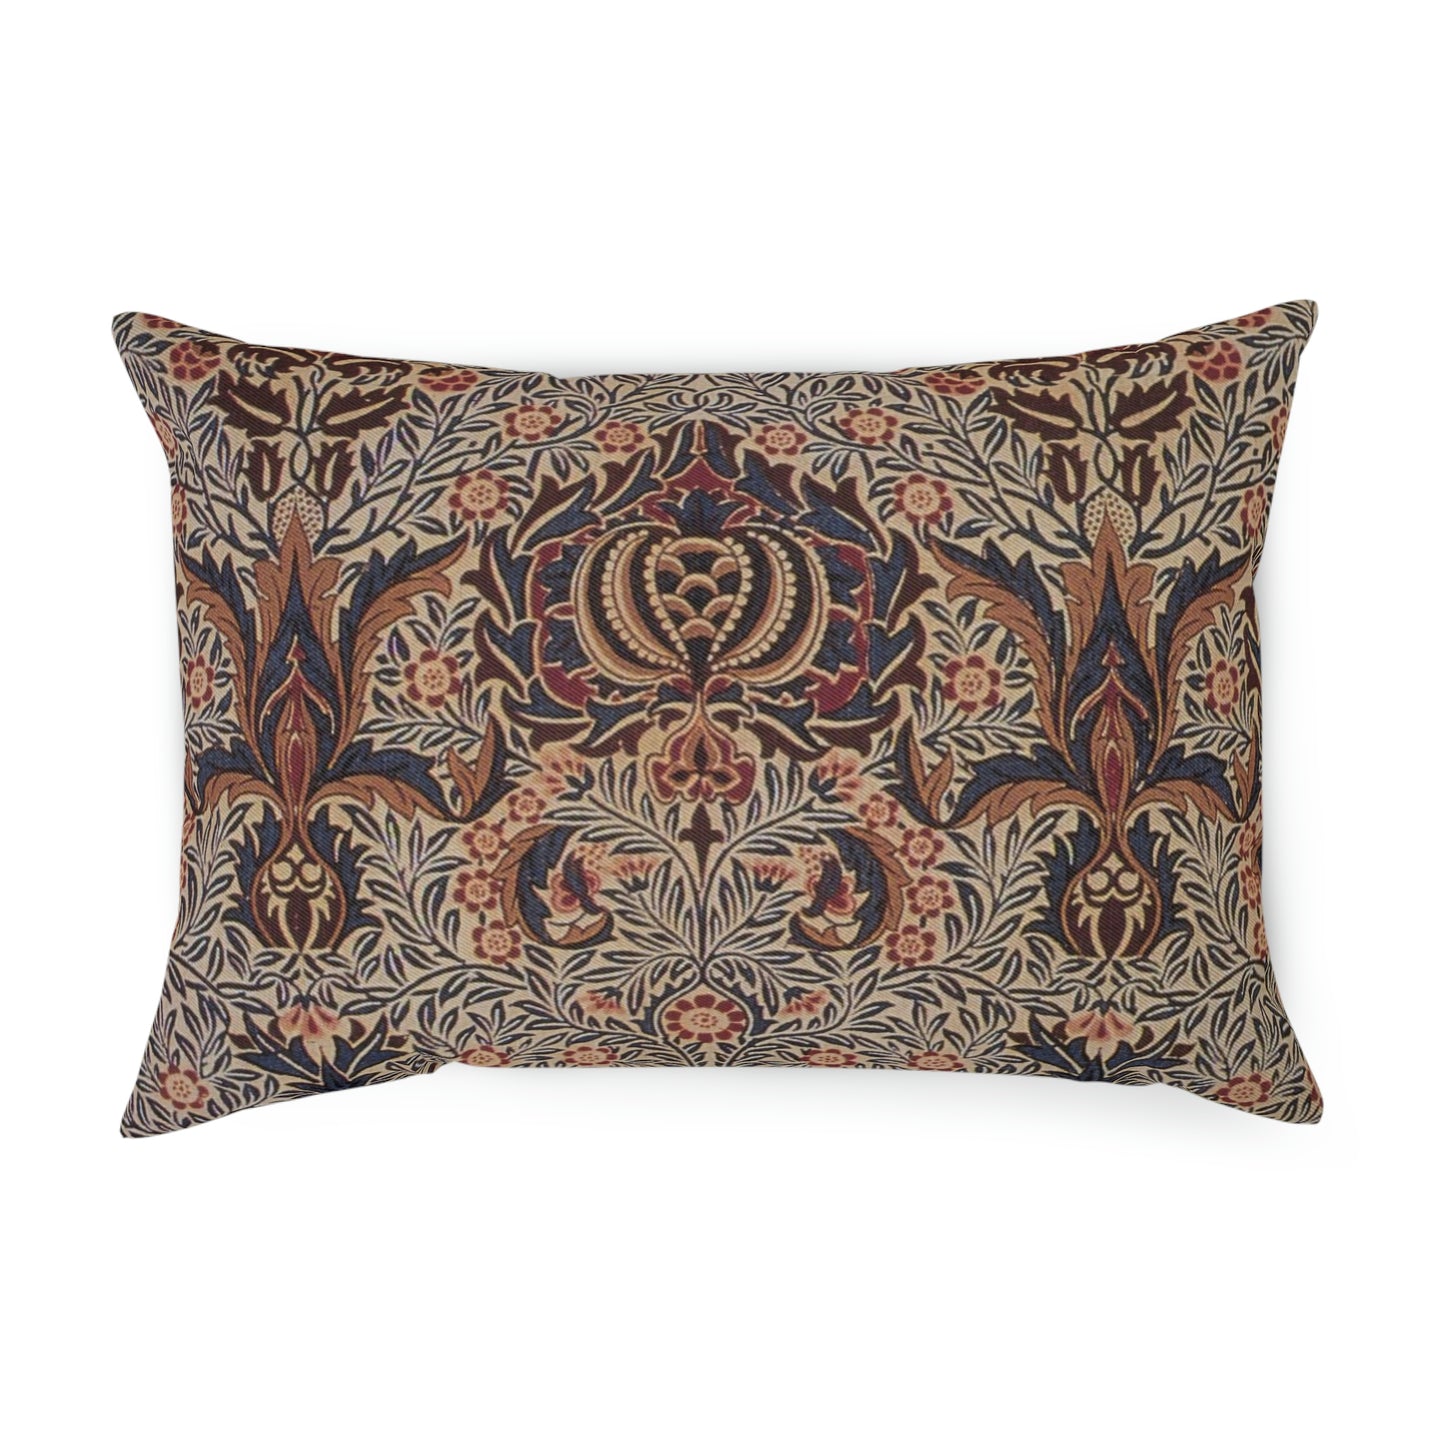 William Morris & Co Cotton Drill Cushion and Cover - Pomegranate Collection